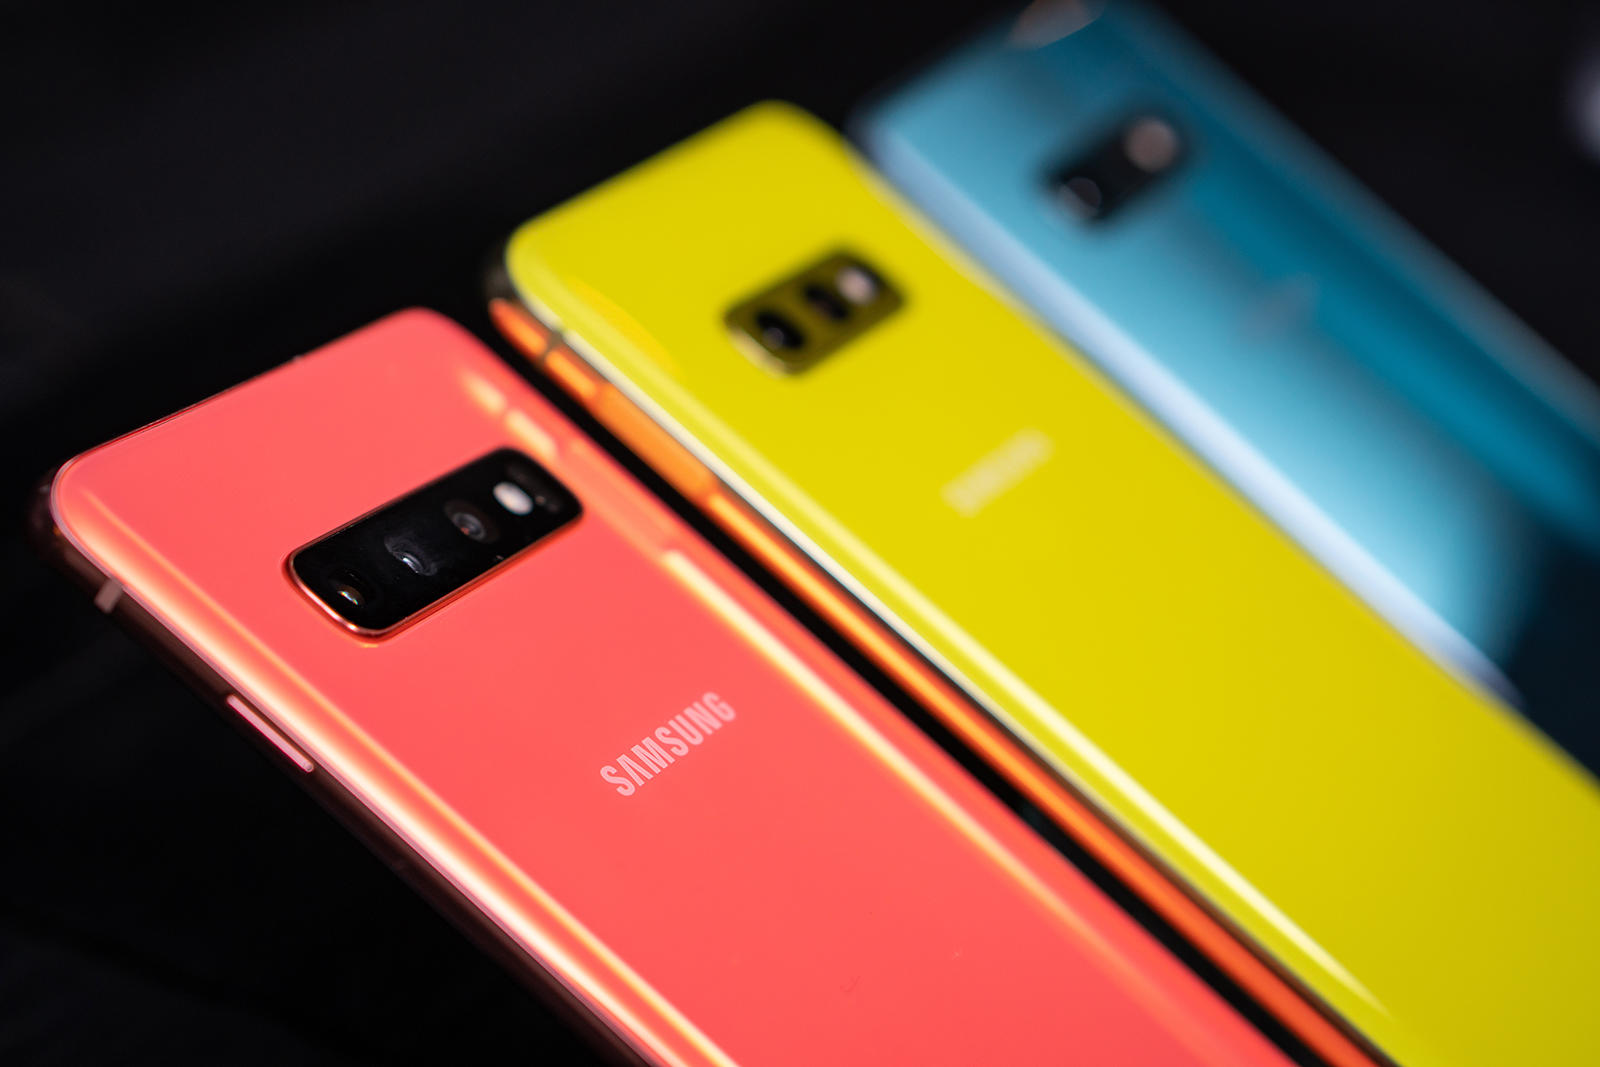 Samsung Galaxy S10 Plus Price, Colors and Reviews